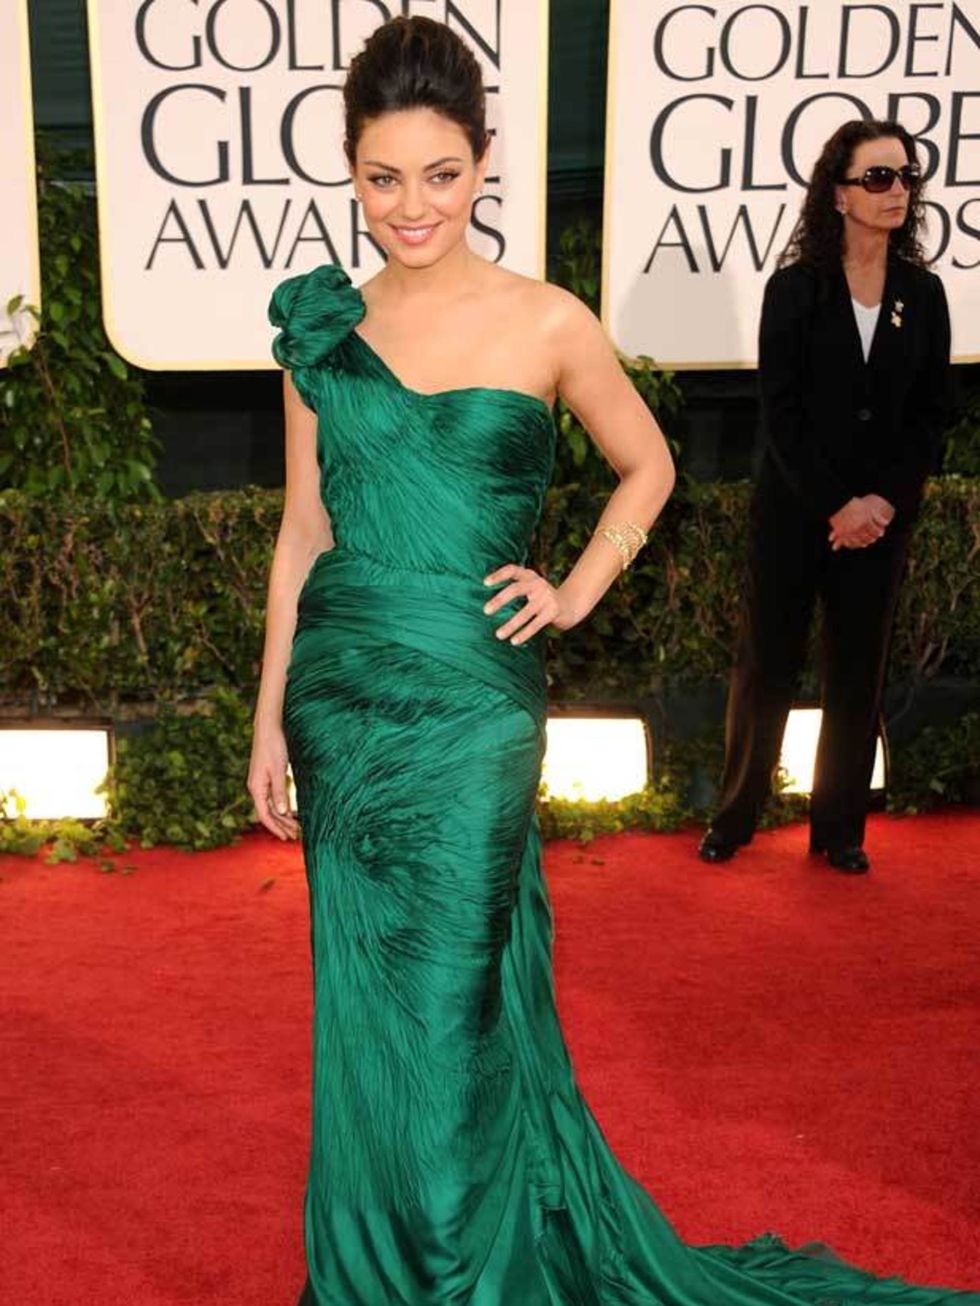 <p>Mila Kunis in emerald <a href="http://www.elleuk.com/catwalk/collections/vera-wang/spring-summer-2011/collection">Vera Wang</a> at the 68th Annual Golden Globe Awards in Los Angeles, 16 January 2011</p>